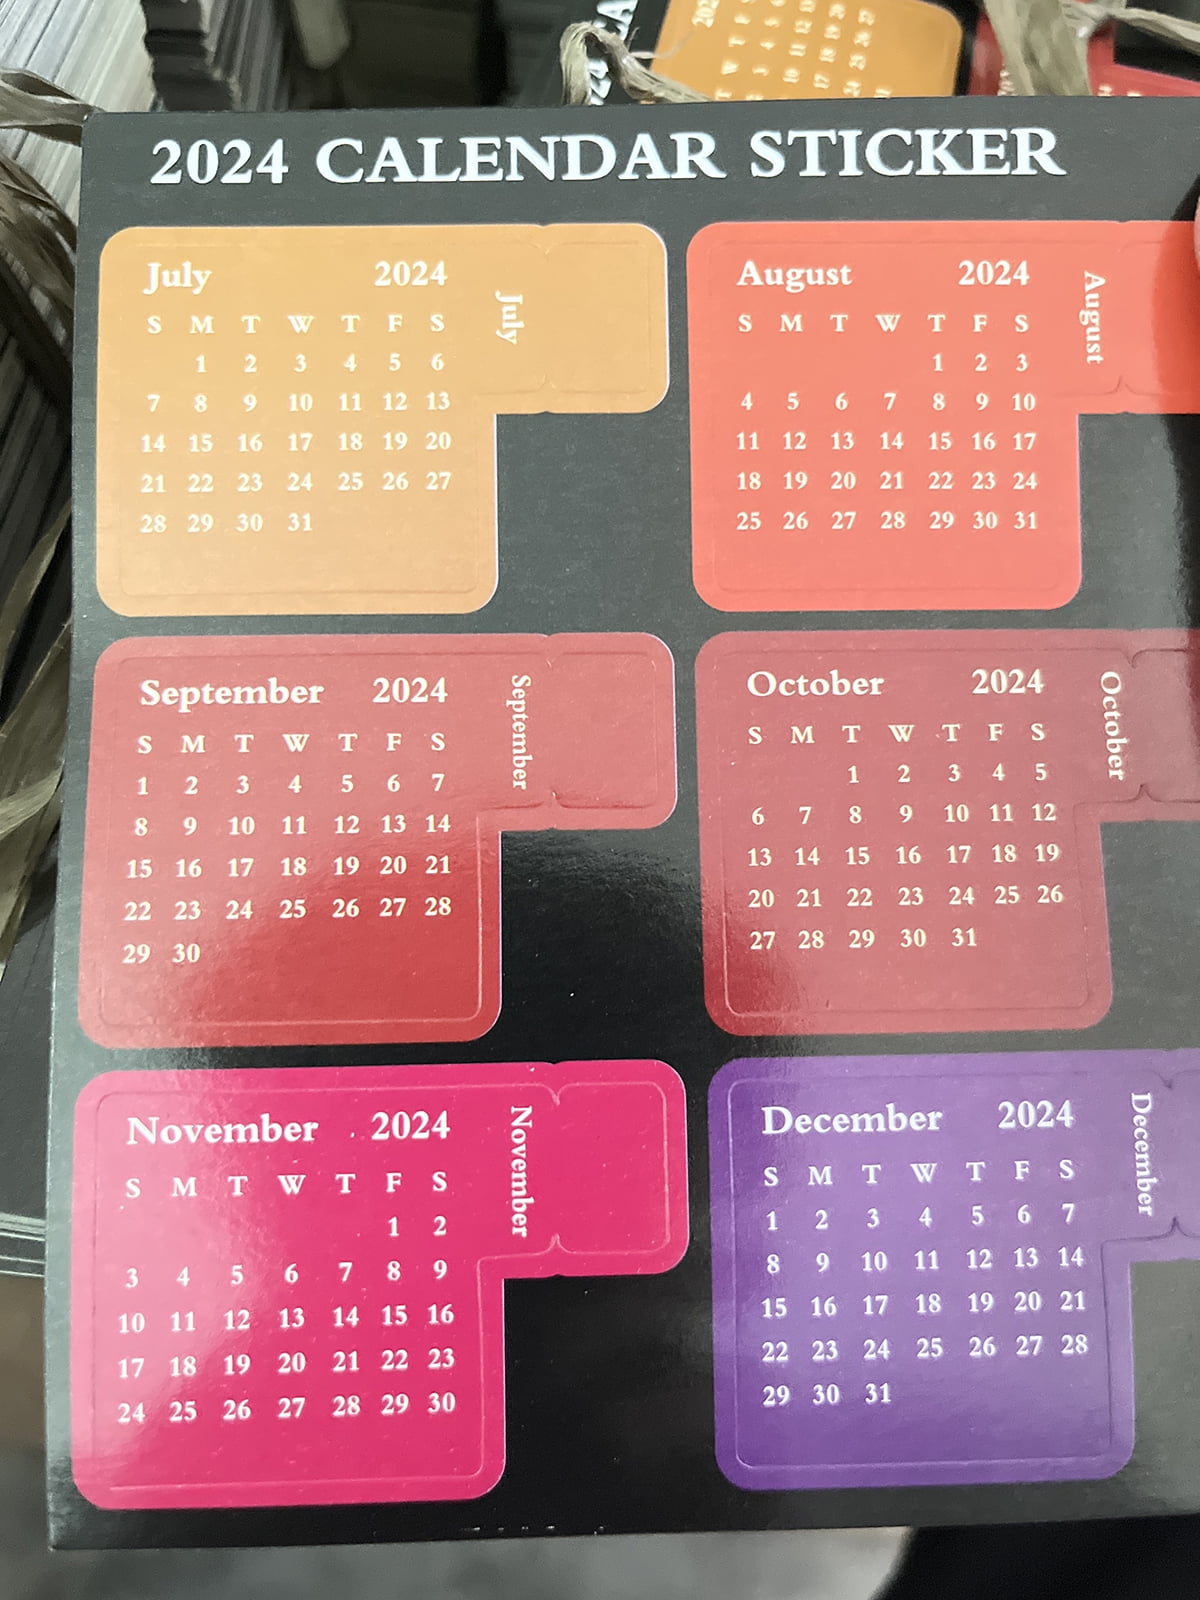 12 Sheets of Calendar Stickers 2024 Schedule Calendar Stickers Monthly